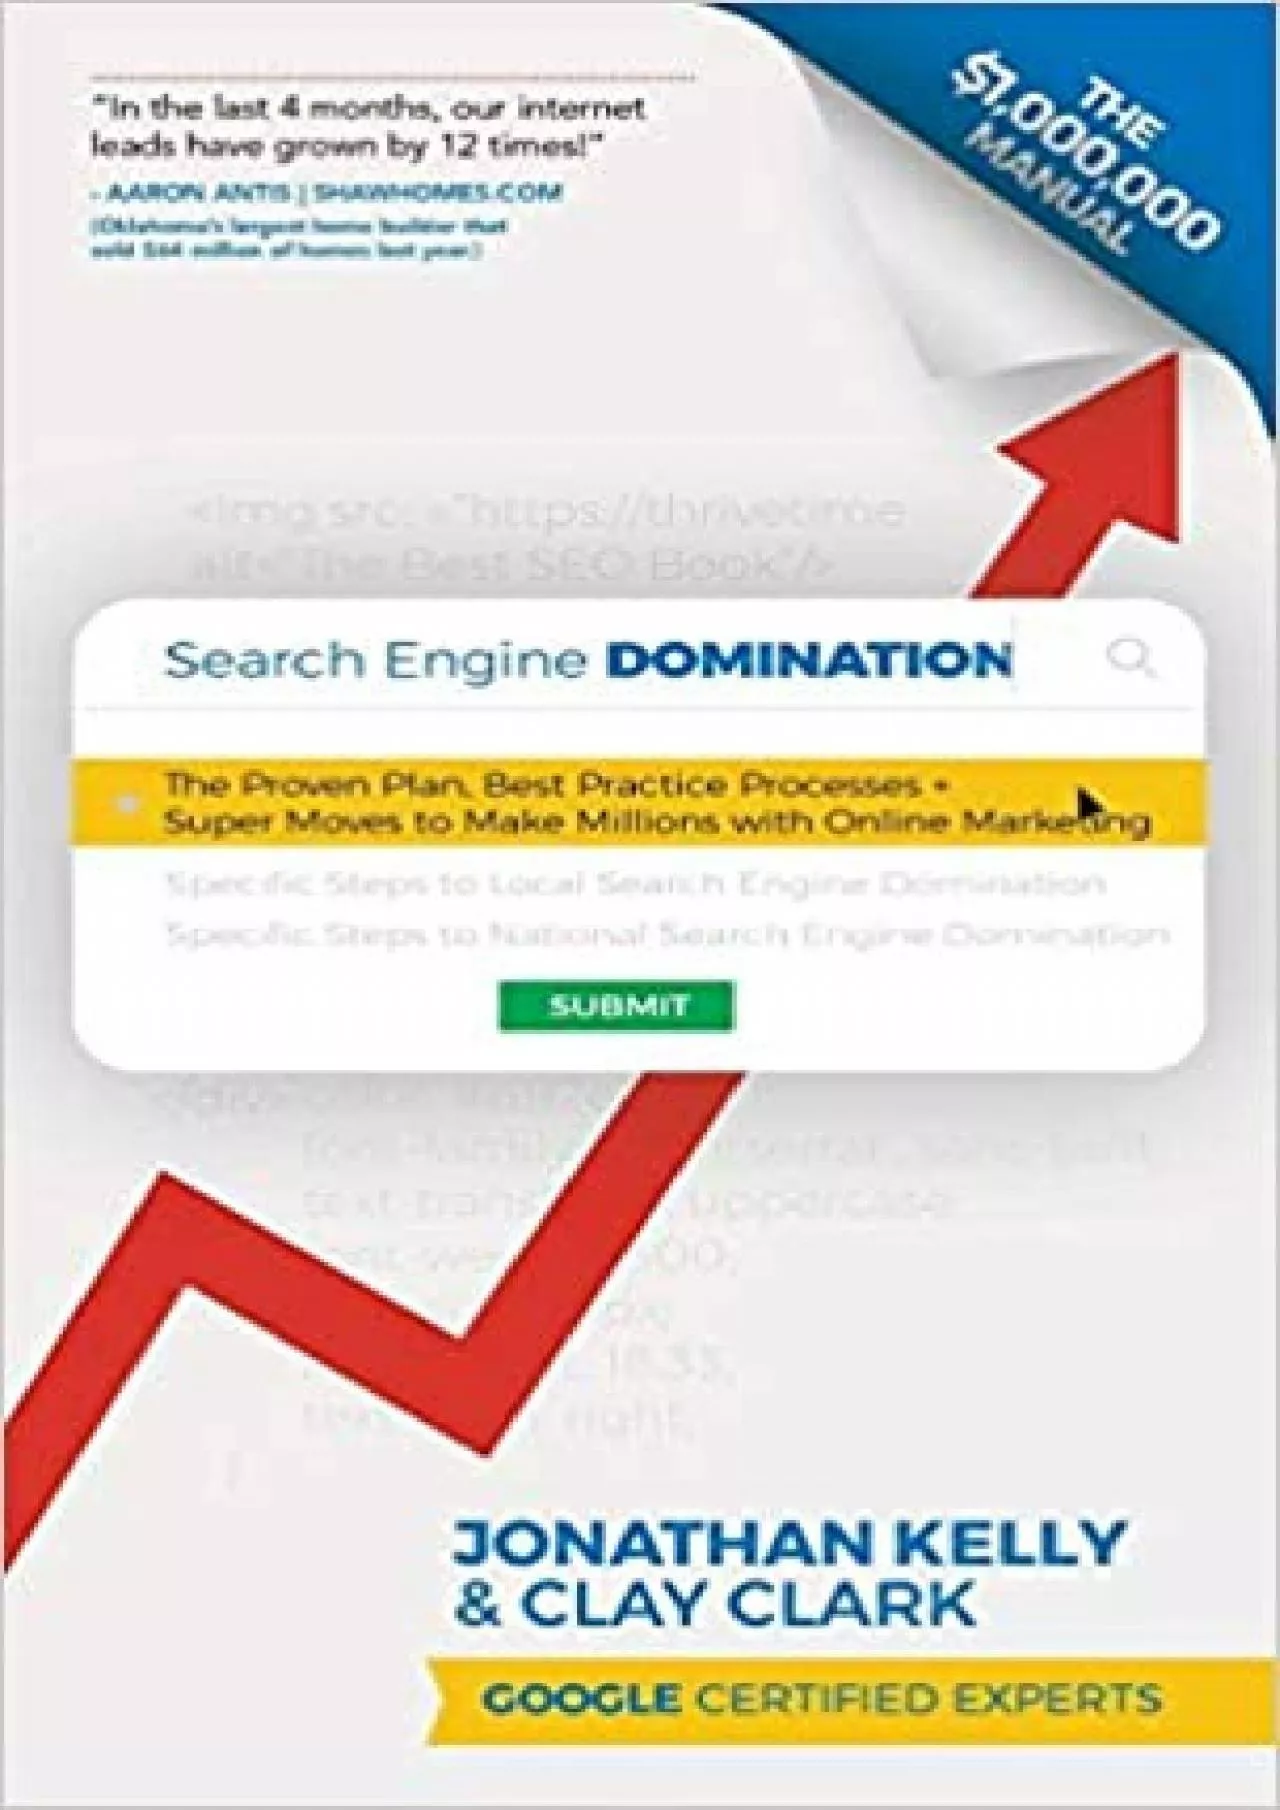 Search Engine Domination The Proven Plan Best Practice Processes + Super Moves to Make